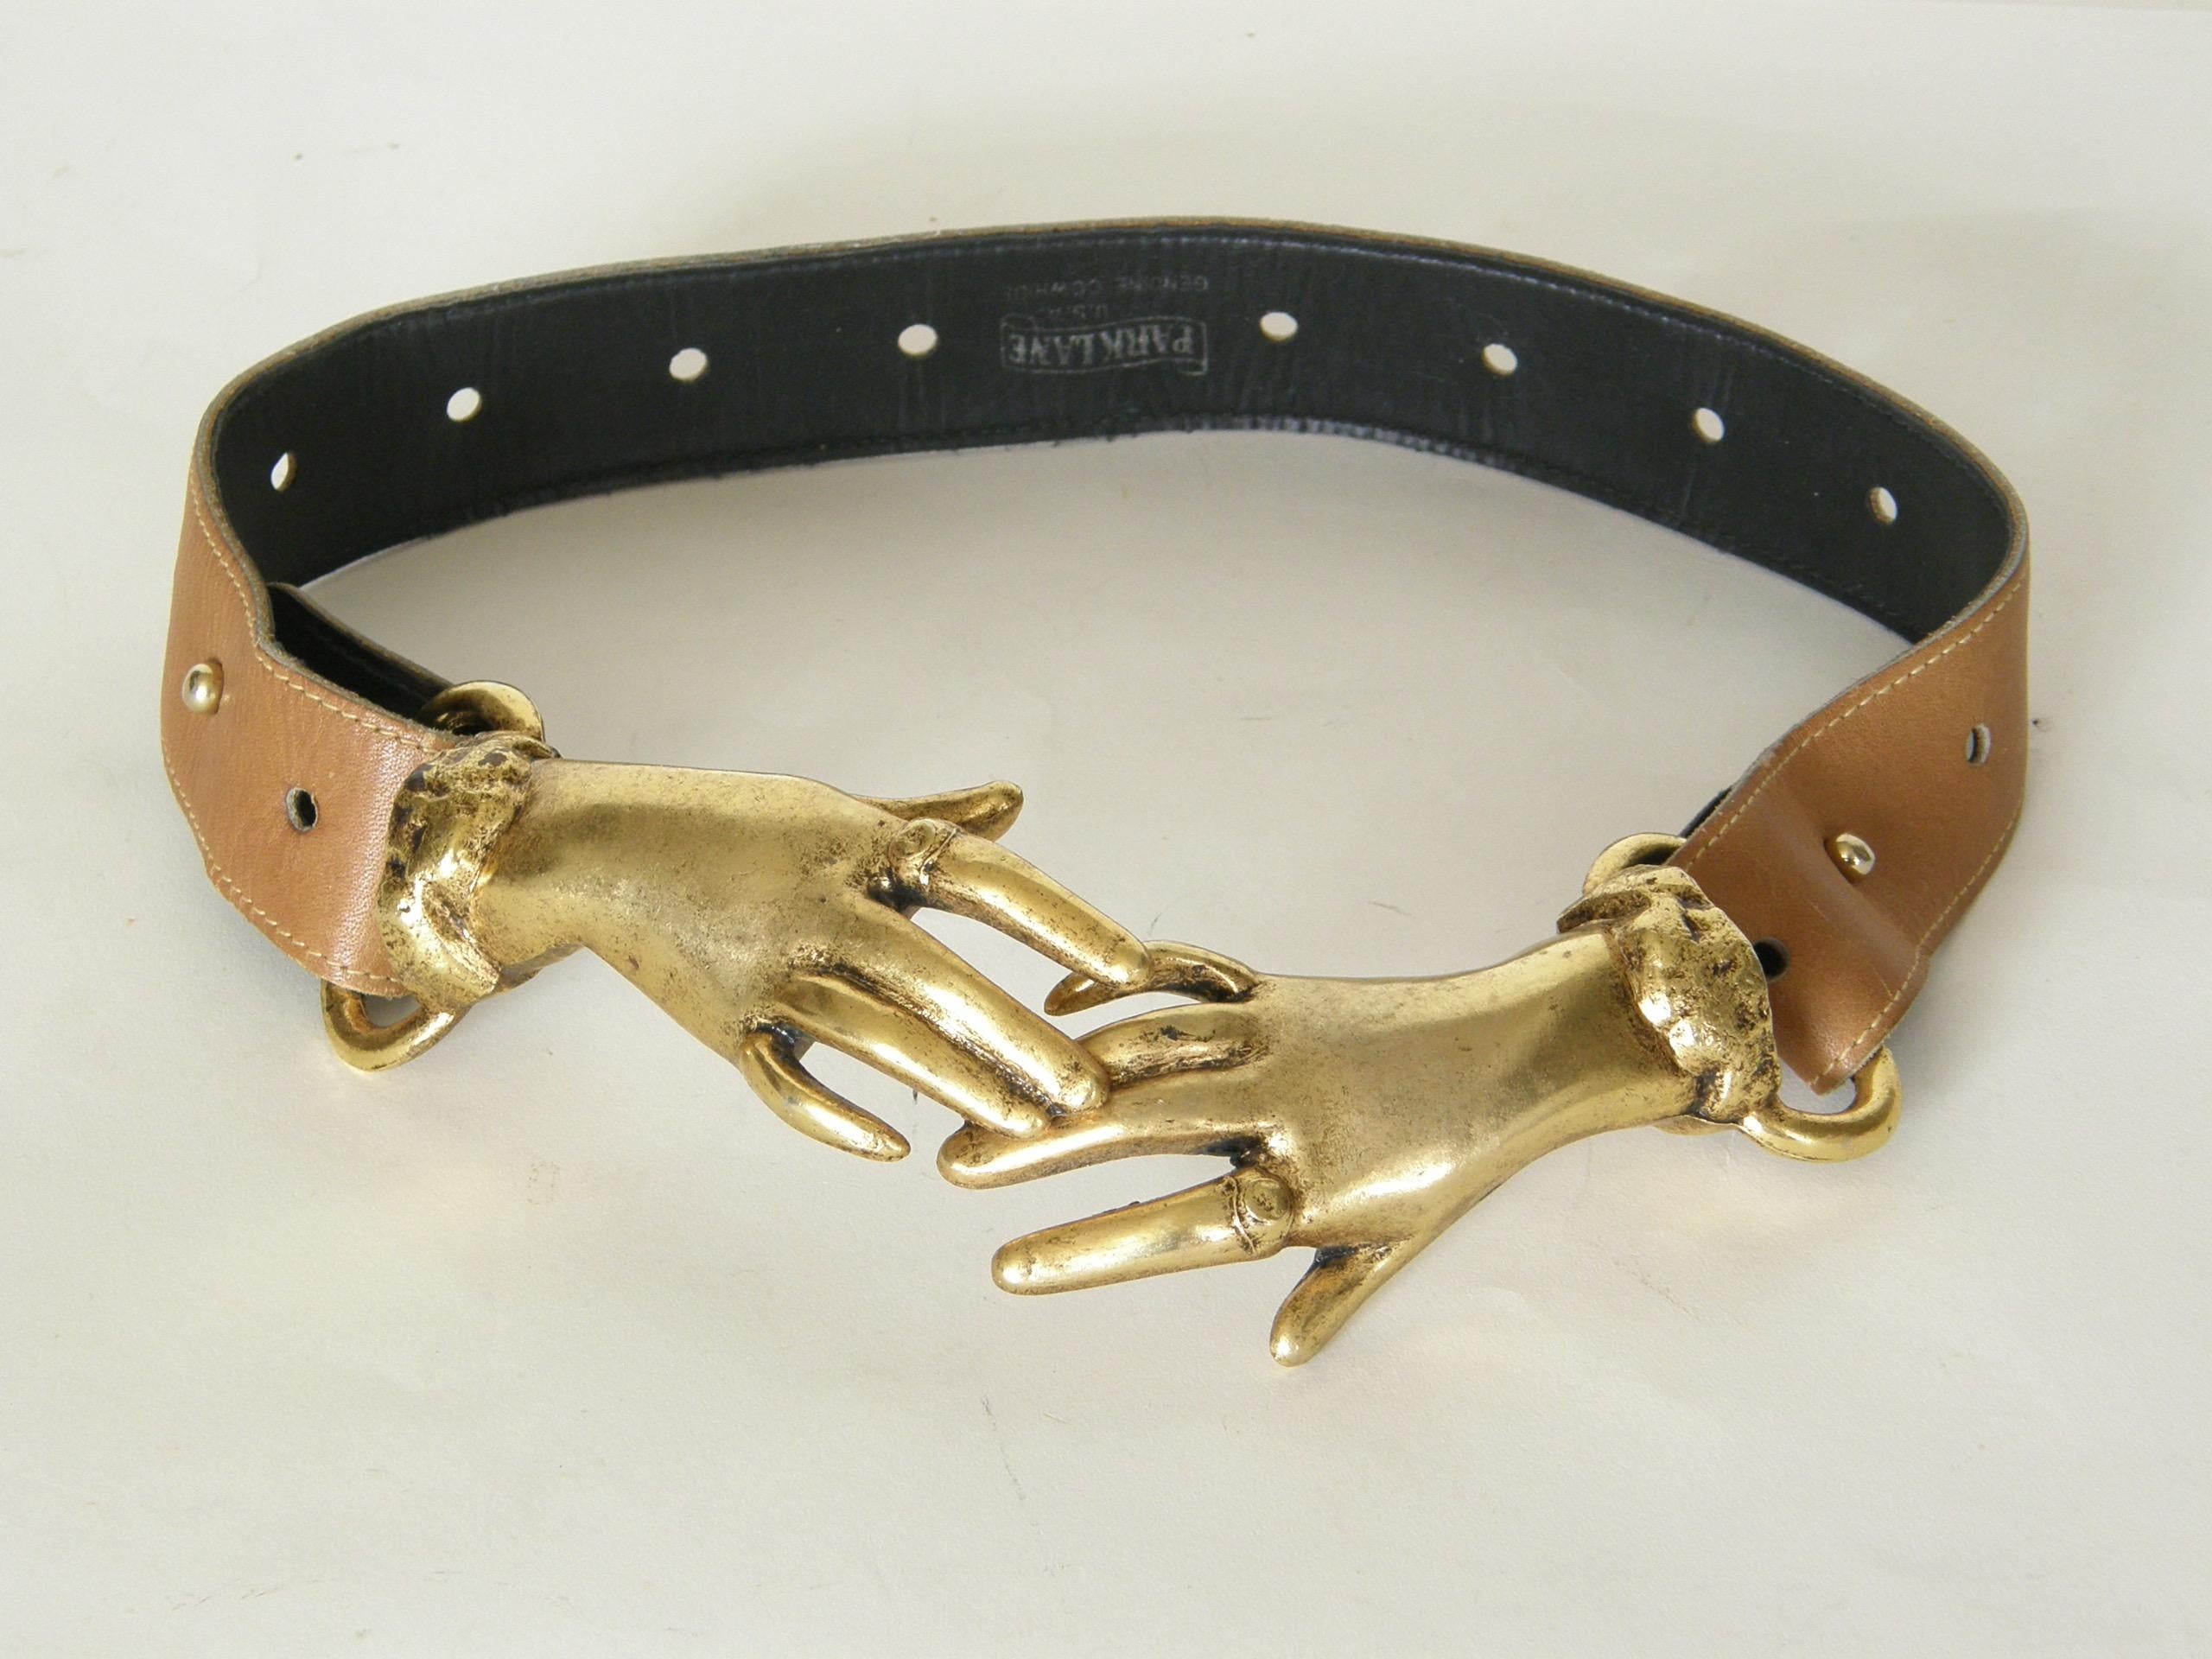 This adjustable belt is a light brown leather and has a charming buckle of two overlapping hands that are not quite clasped. They wear rings and bracelets (or perhaps have fancy cuff details) and have a romantic, Victorian style with an 